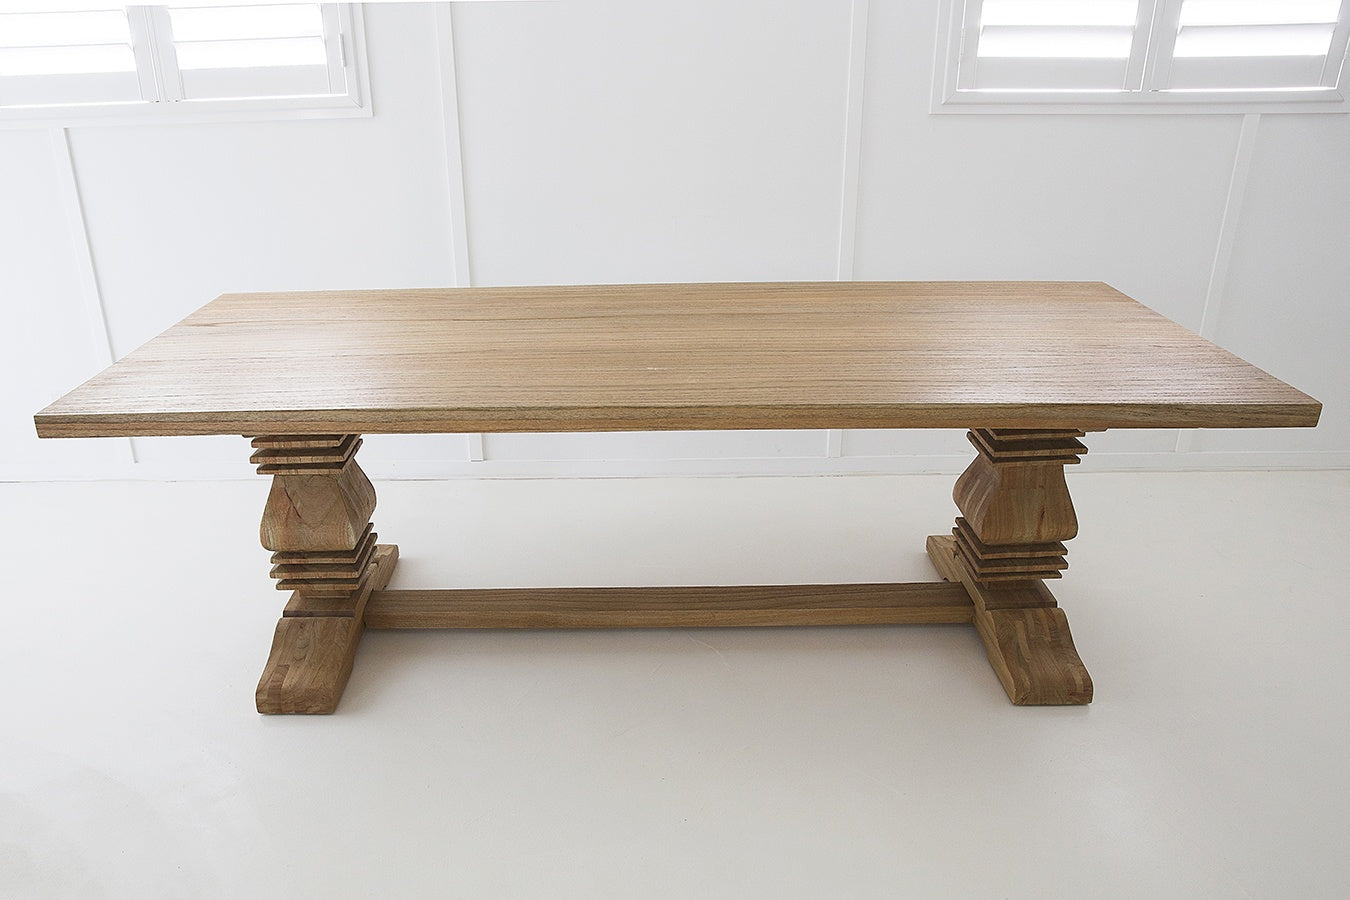 Clearwater Pedestal Table - 220cm